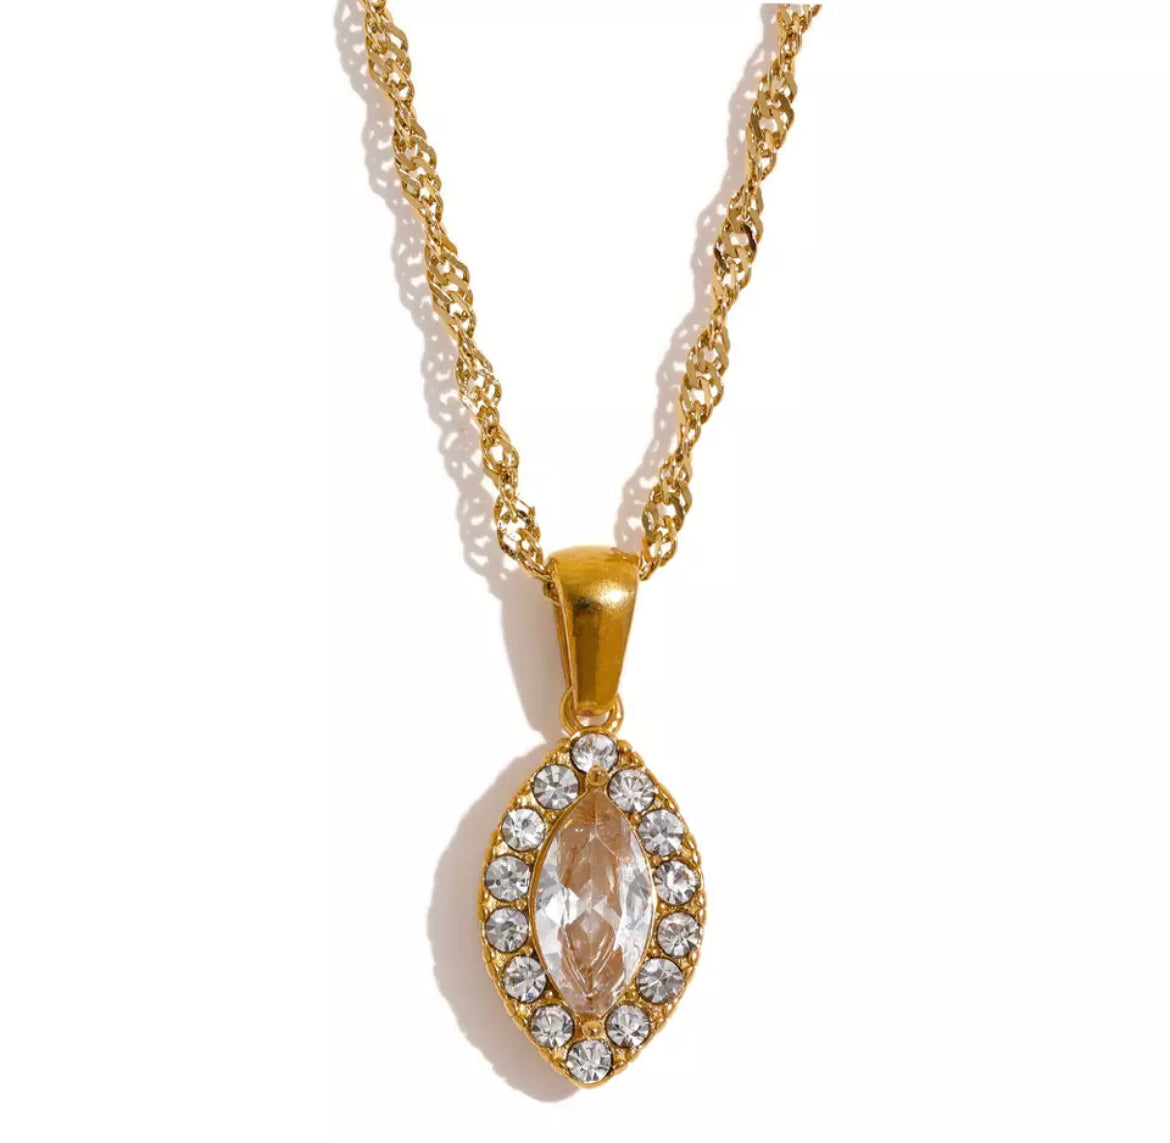 Sparkling Pear Shaped Pendant Necklace